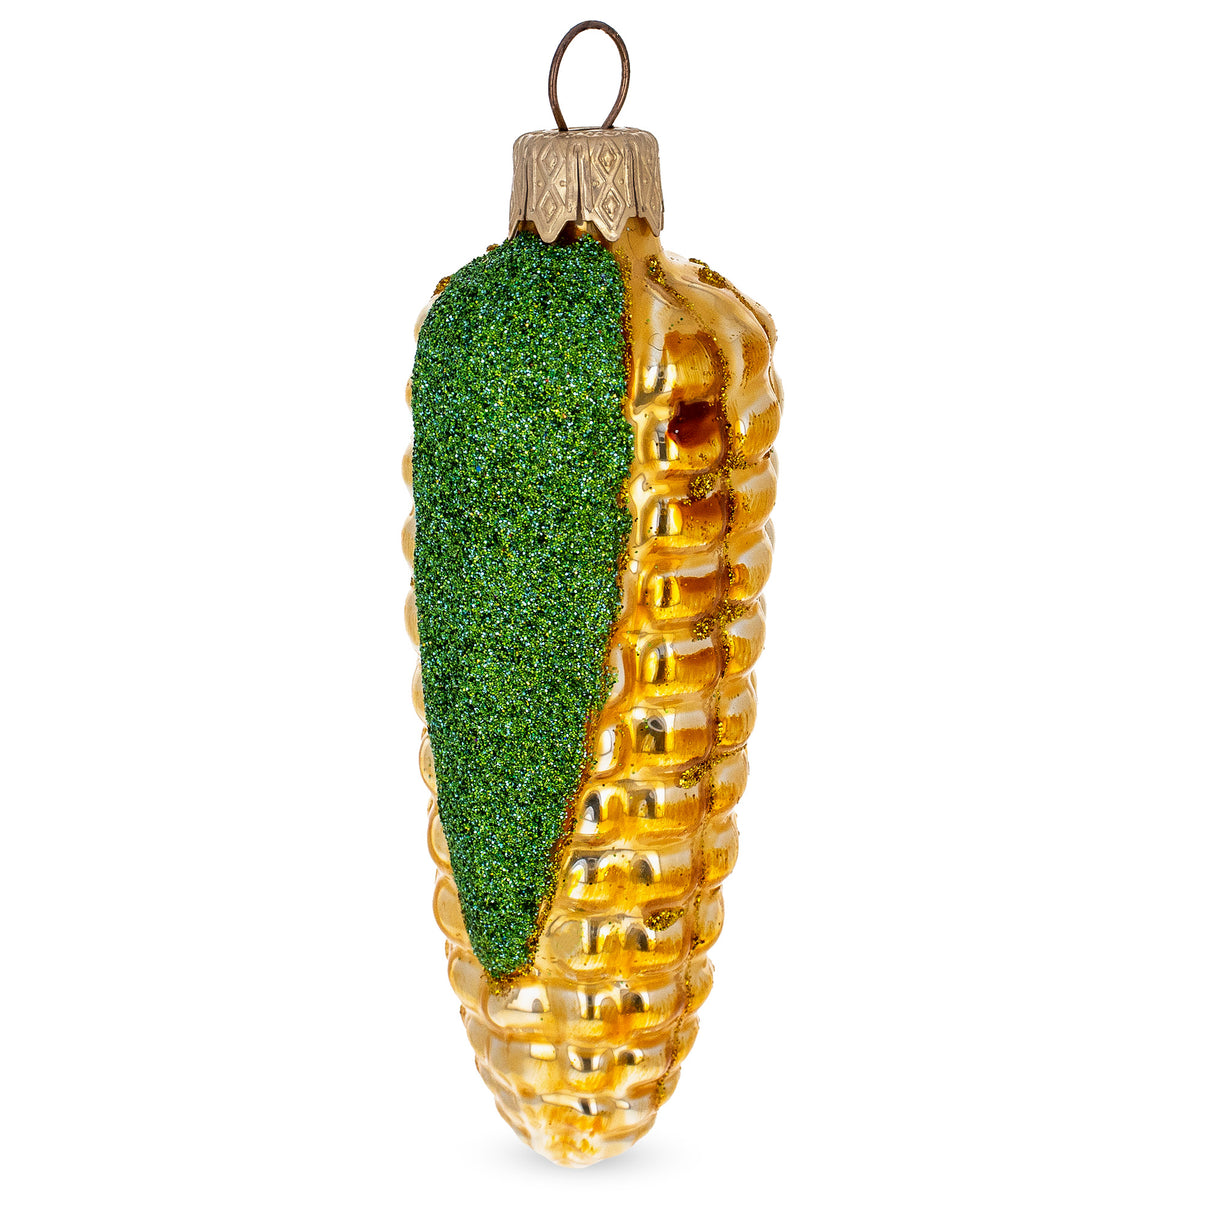 Glittered Corn on the Cob Glass Christmas Ornament in Yellow color,  shape